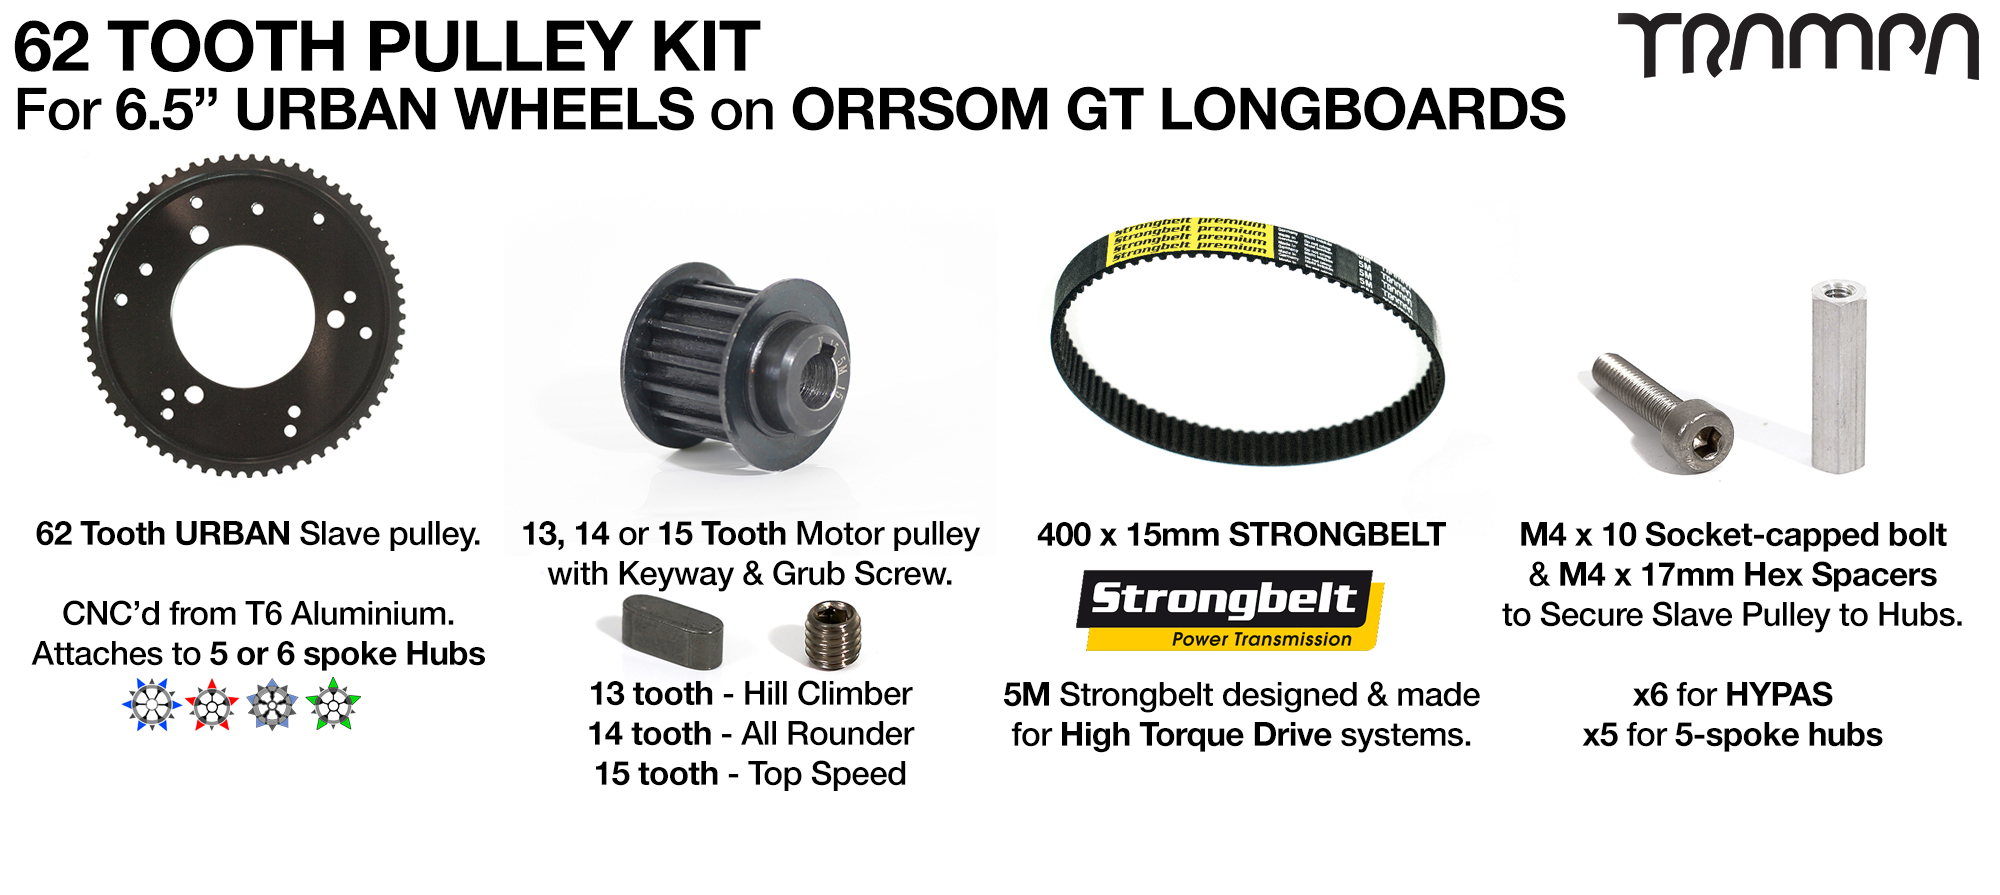 TRAMPA ORRSOM GT Longboard Pulley kit with 62 Tooth Slave & 400mm x 15mm Belt to fit 6.5 Inch URBAN TREADS Tyres on to 14FiFties Trucks